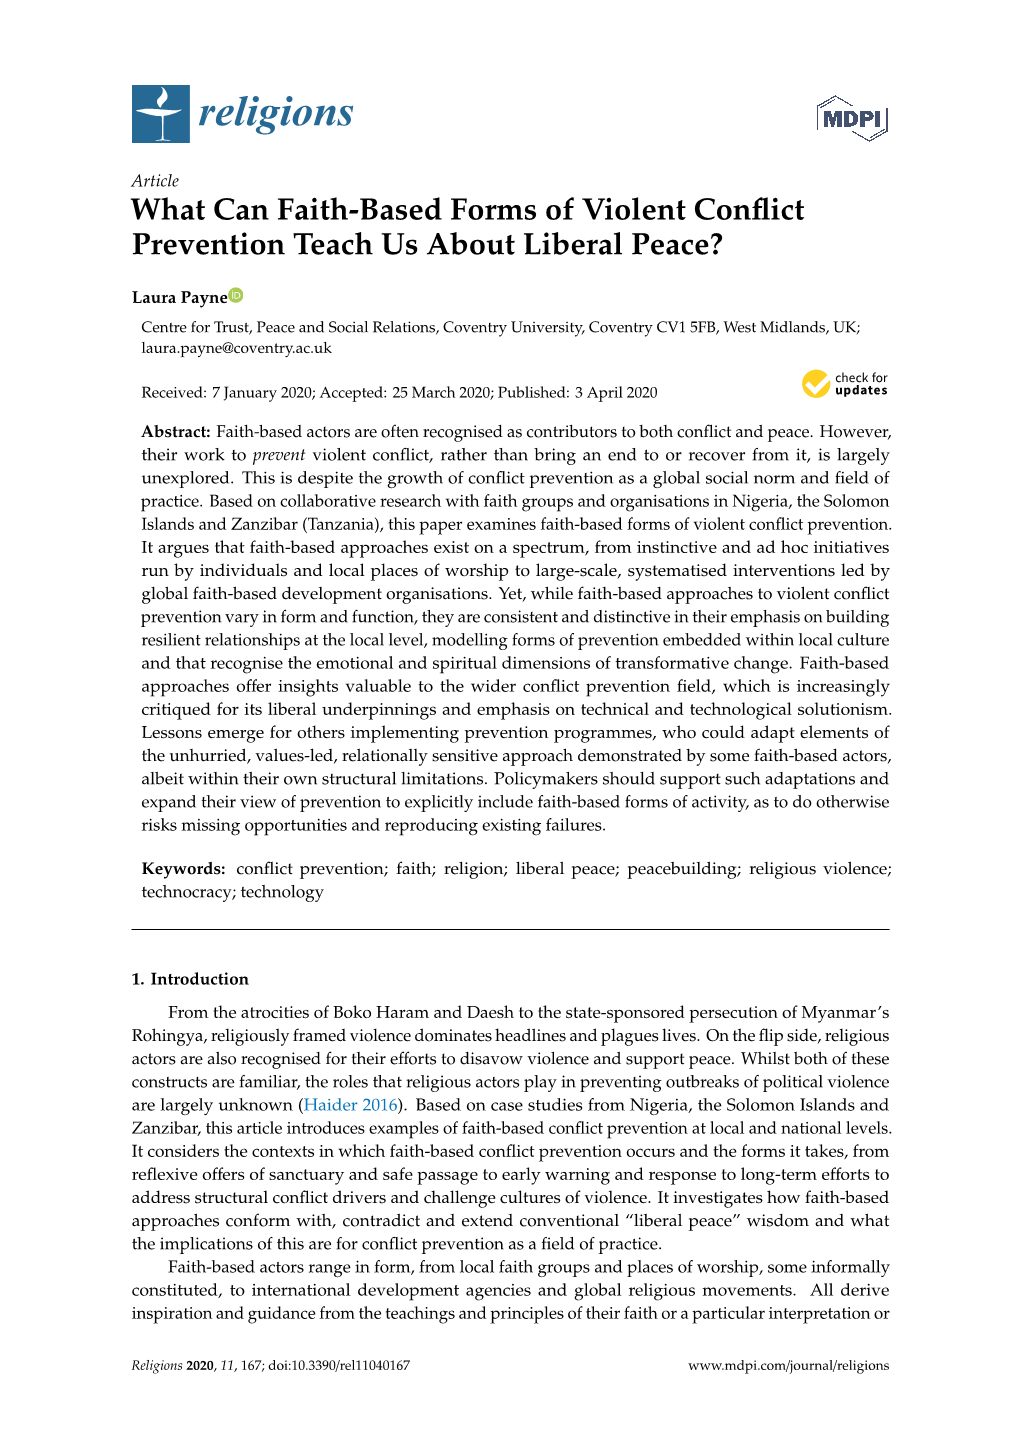 What Can Faith-Based Forms of Violent Conflict Prevention Teach Us About Liberal Peace?